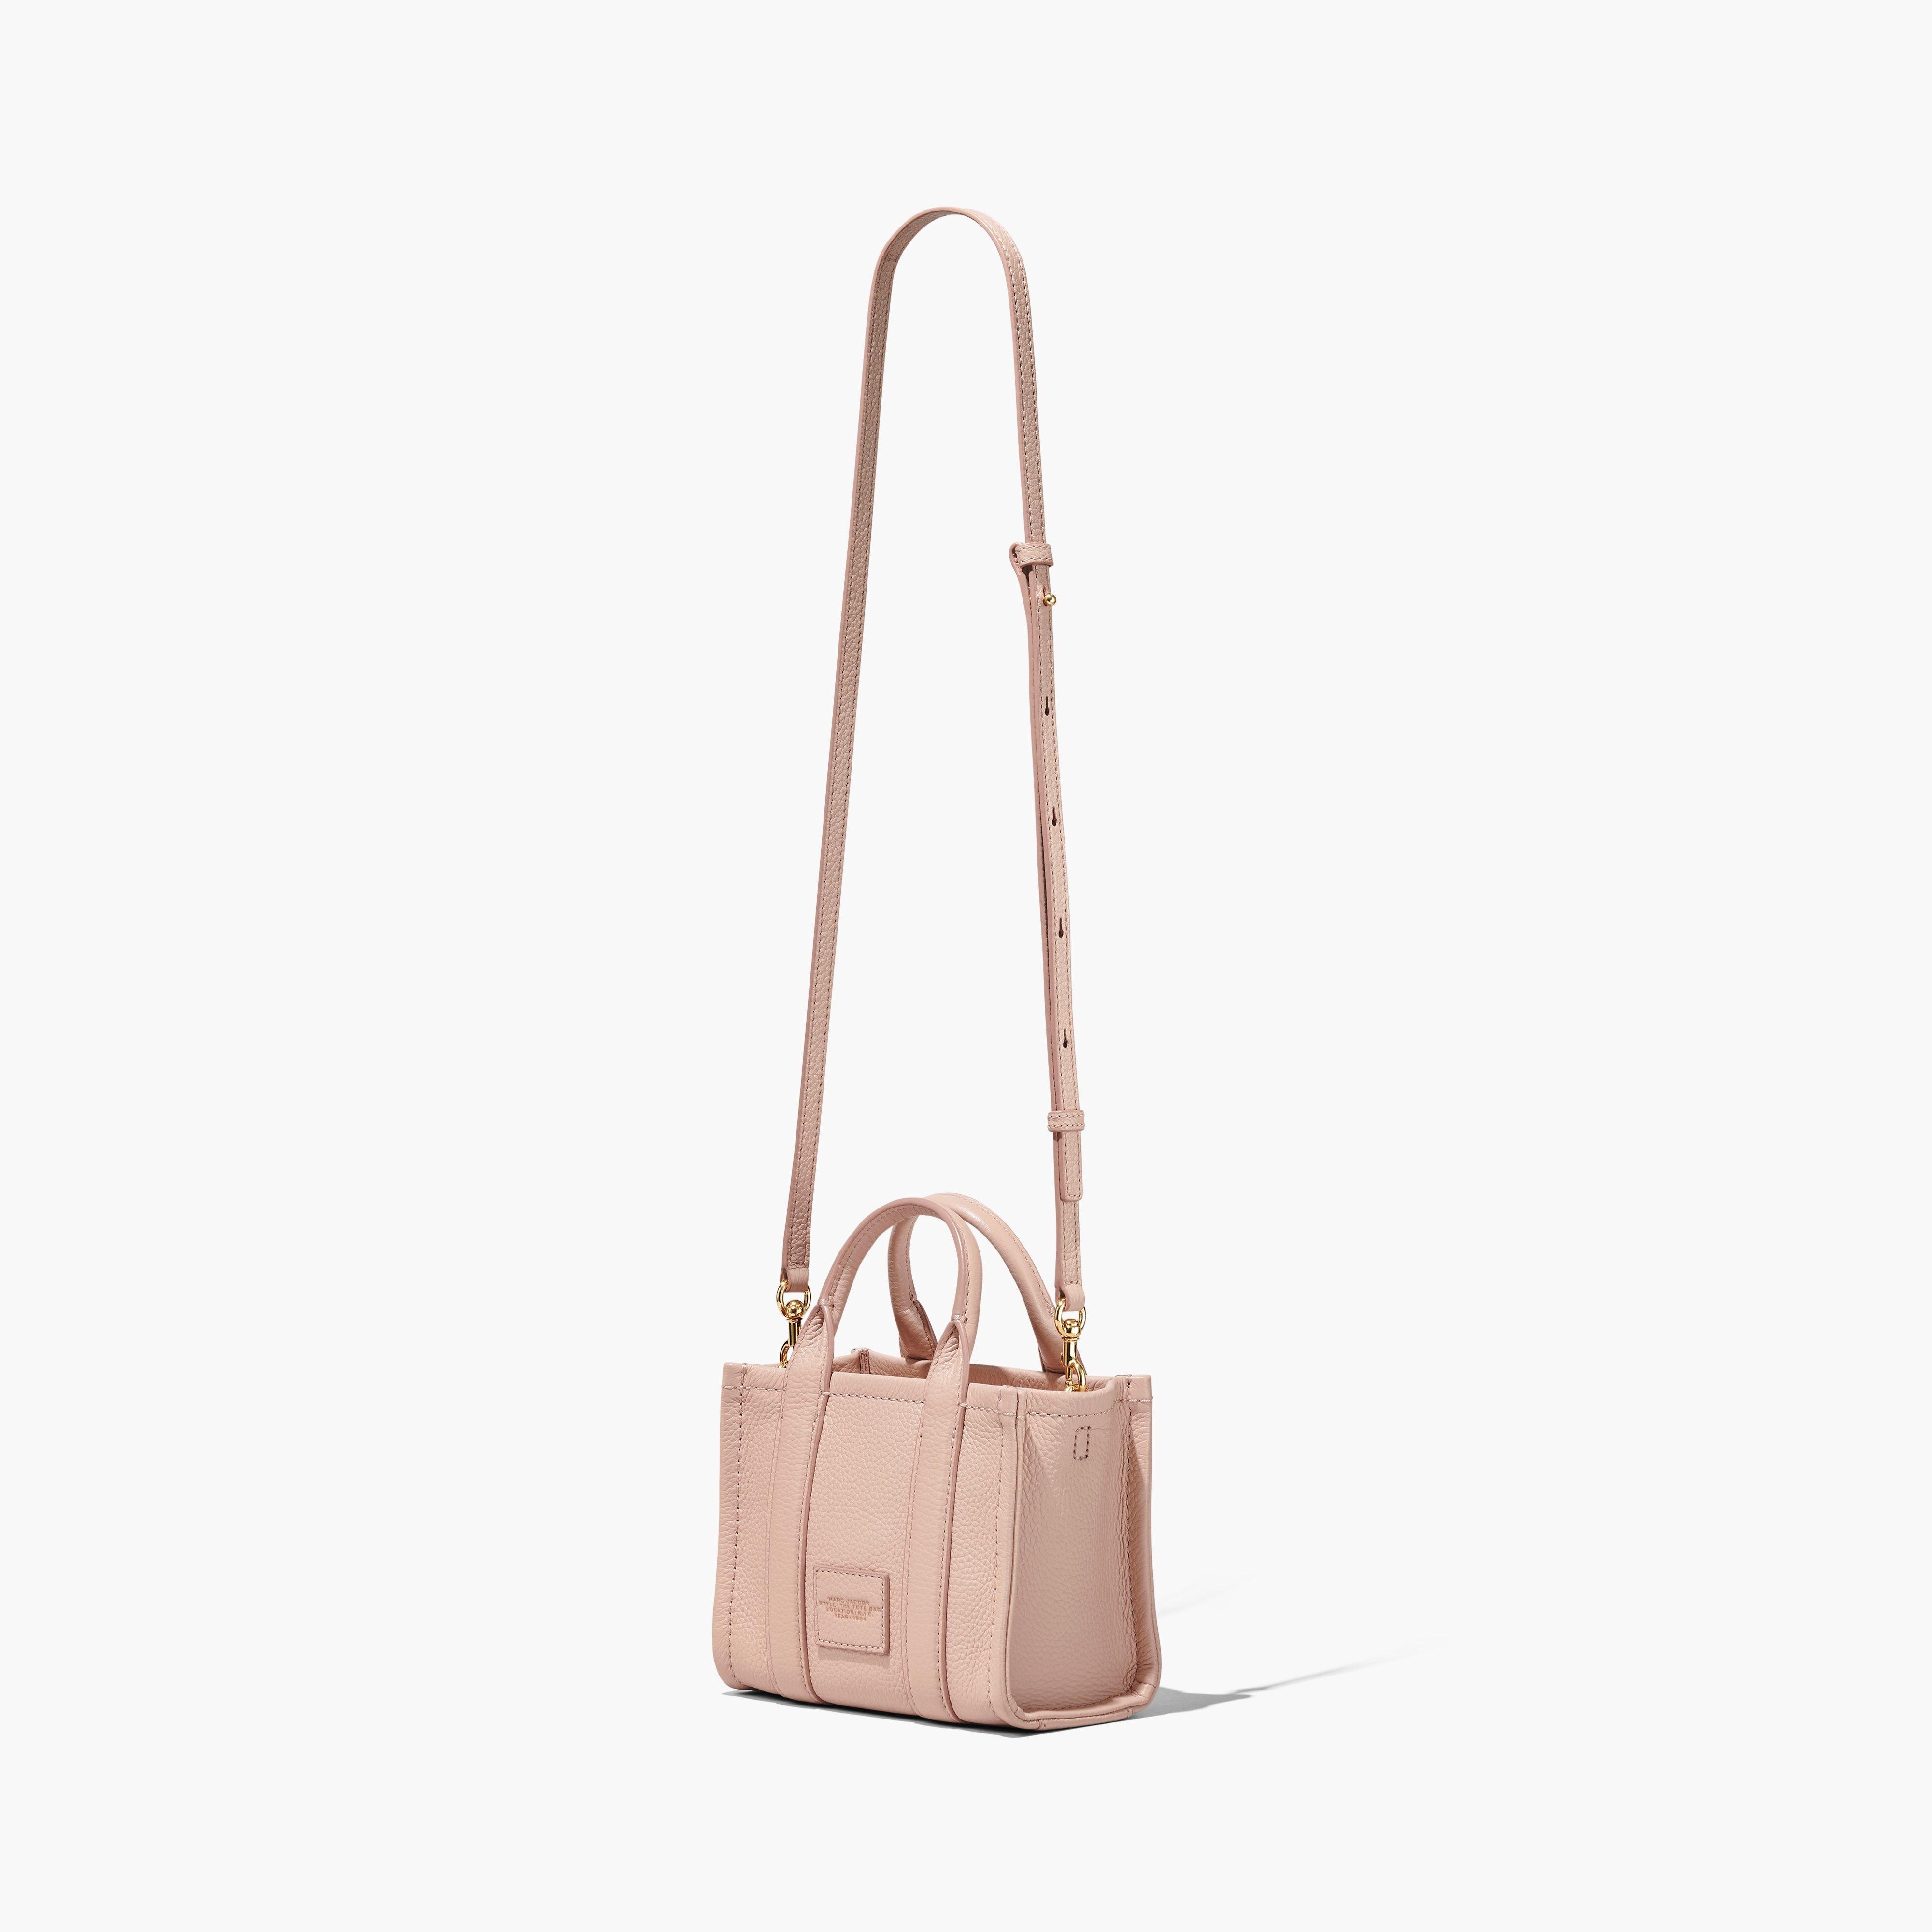 THE LEATHER MICRO TOTE BAG - 3